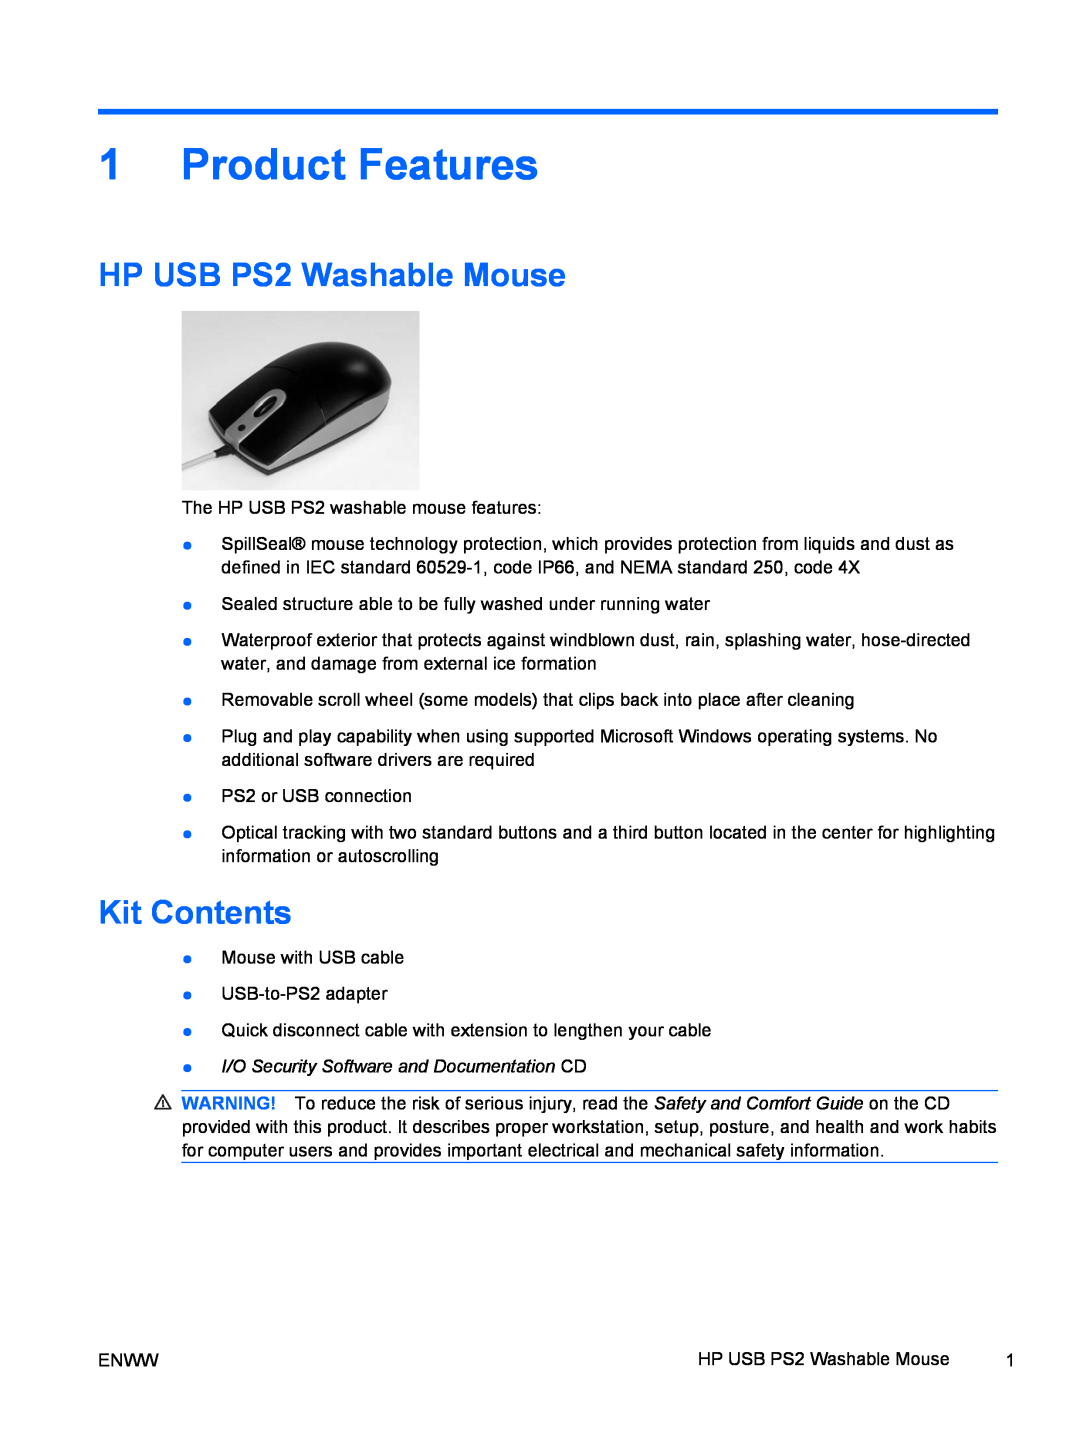 HP 8000 tower manual Product Features, HP USB PS2 Washable Mouse, Kit Contents, I/O Security Software and Documentation CD 